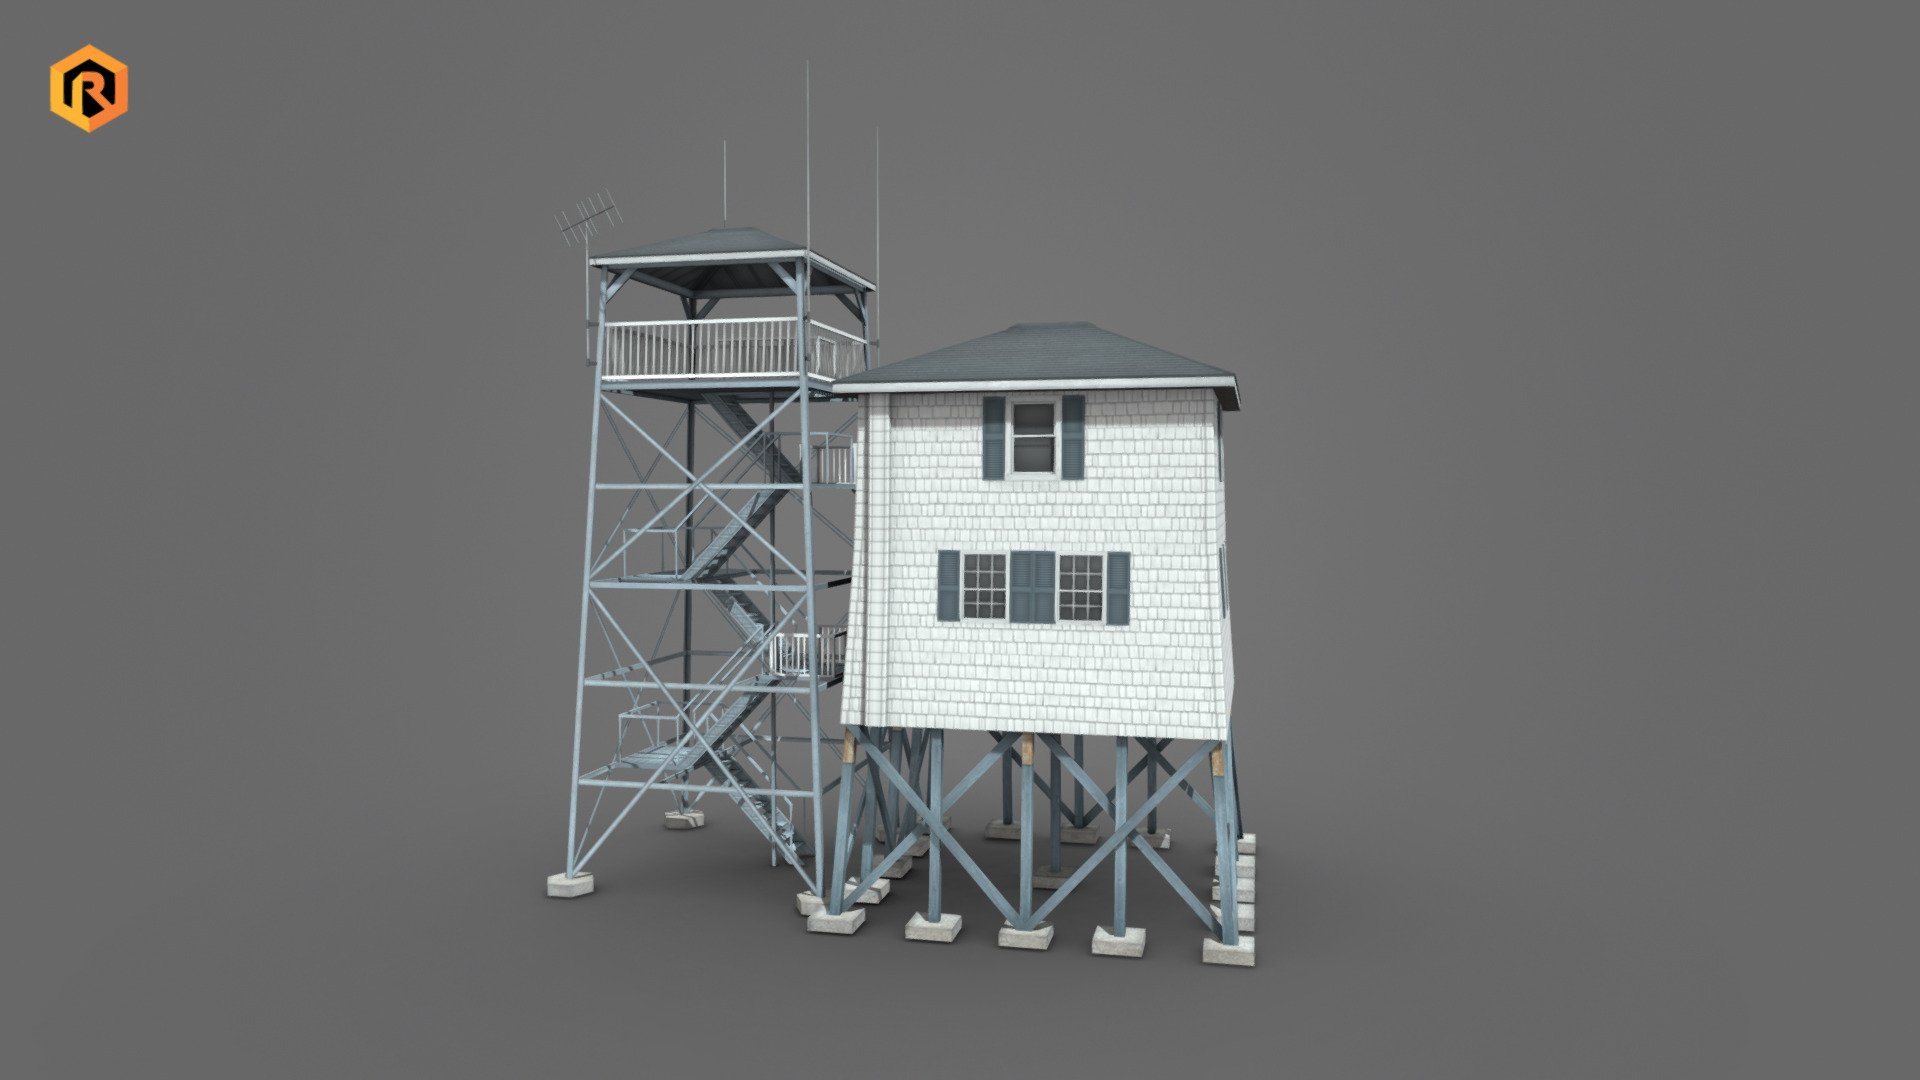 Low-poly 3D model of Radio Tower with some residential building. 

There are 2 objects a main building and a radio tower which can be located together or separately. 

It is best for use in games and other VR / AR, real-time applications such as Unity or Unreal Engine.

It can also be rendered in Blender (ex Cycles) or Vray as the model is equipped with proper textures. 

You can also buy this model in a bundle: https://skfb.ly/ovQJB

Technical details:


2048 x 2048 Building Diffuse and AO textures
2048 x 2048 Tower Diffuse and AO textures
3996 Triangles
3214 Vertices
Model is divied into two meshes.
Model is completely unwrapped.
Model is fully textured with all materials applied. 
Lot of additional file formats included (Blender, Unity, Maya etc.)

More file formats are available in additional zip file on product page.

Please feel free to contact me if you have any questions or need any support for this asset.

Support e-mail: support@rescue3d.com - Radio Tower Building - Buy Royalty Free 3D model by Rescue3D Assets (@rescue3d) 3d model